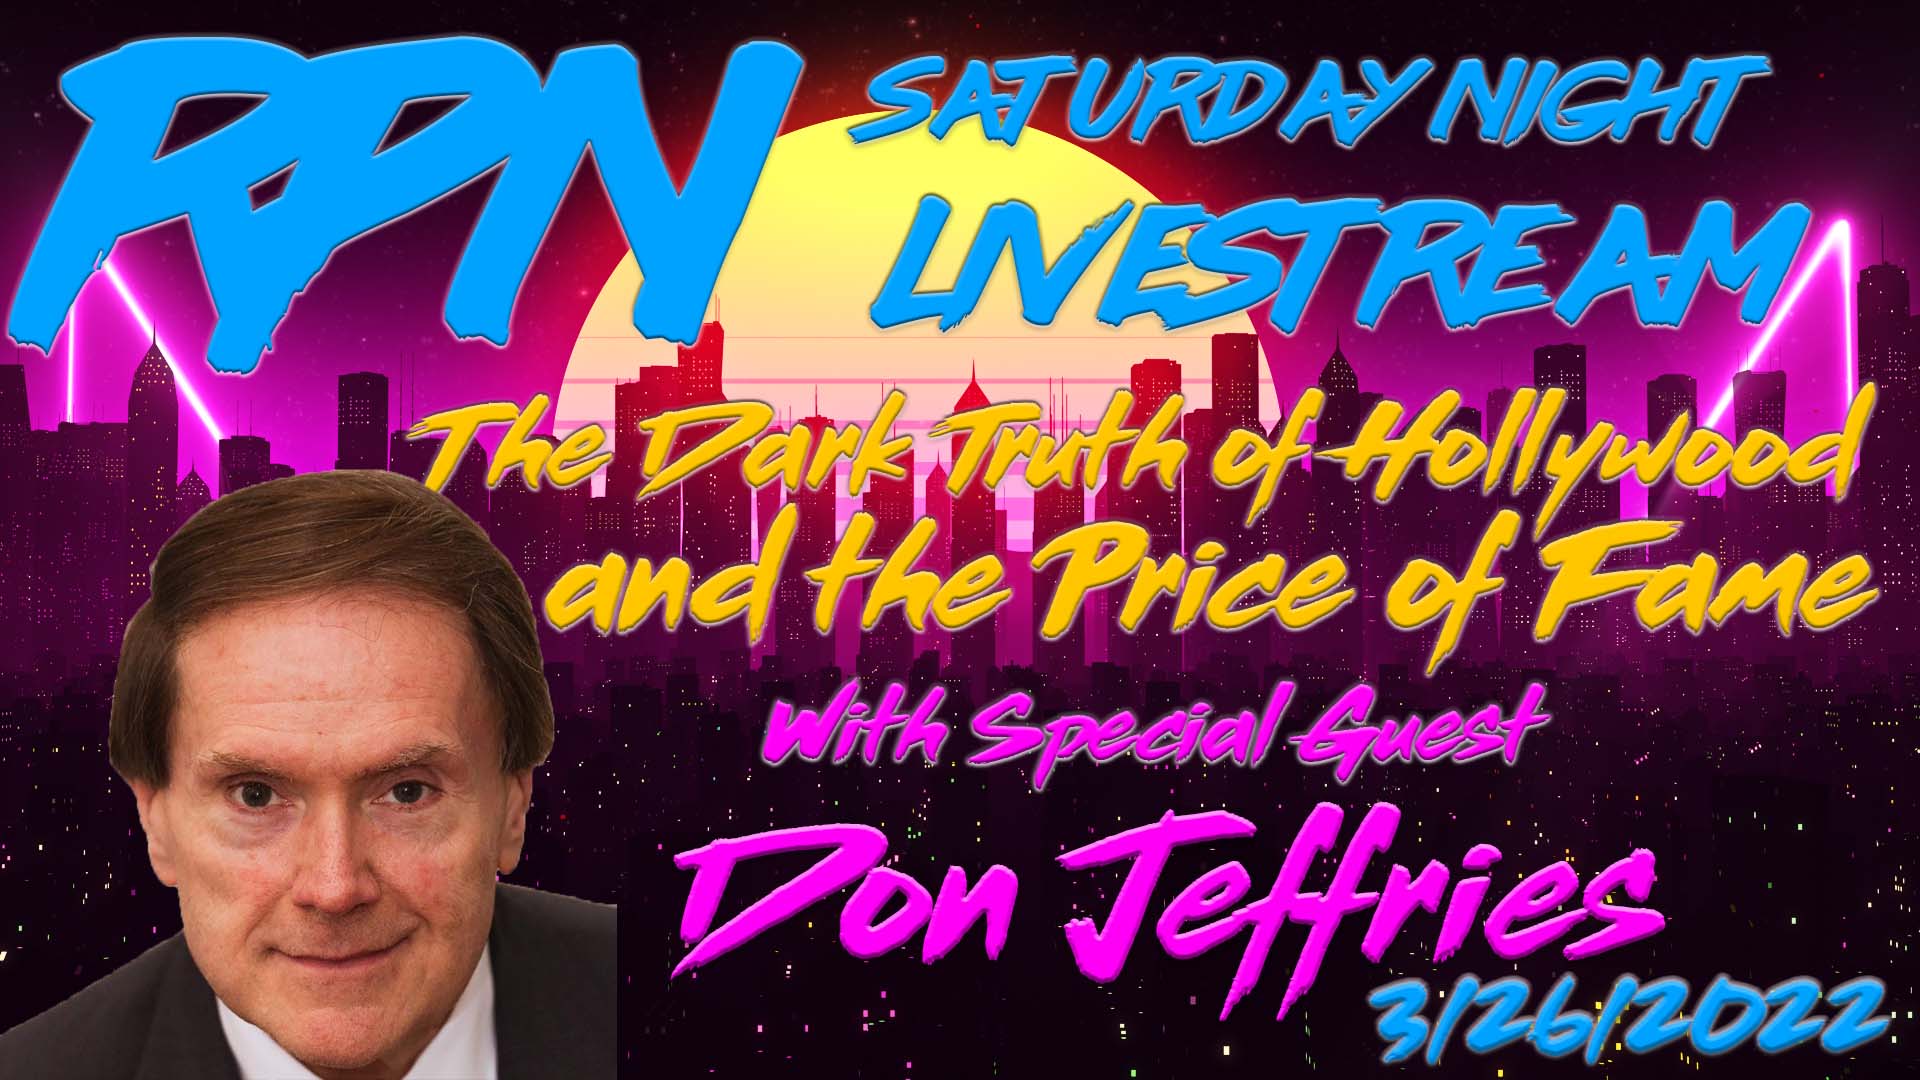 Don Jeffries - The Price of Fame & The Hollywood’s Dark History on Sat. Night Livestream